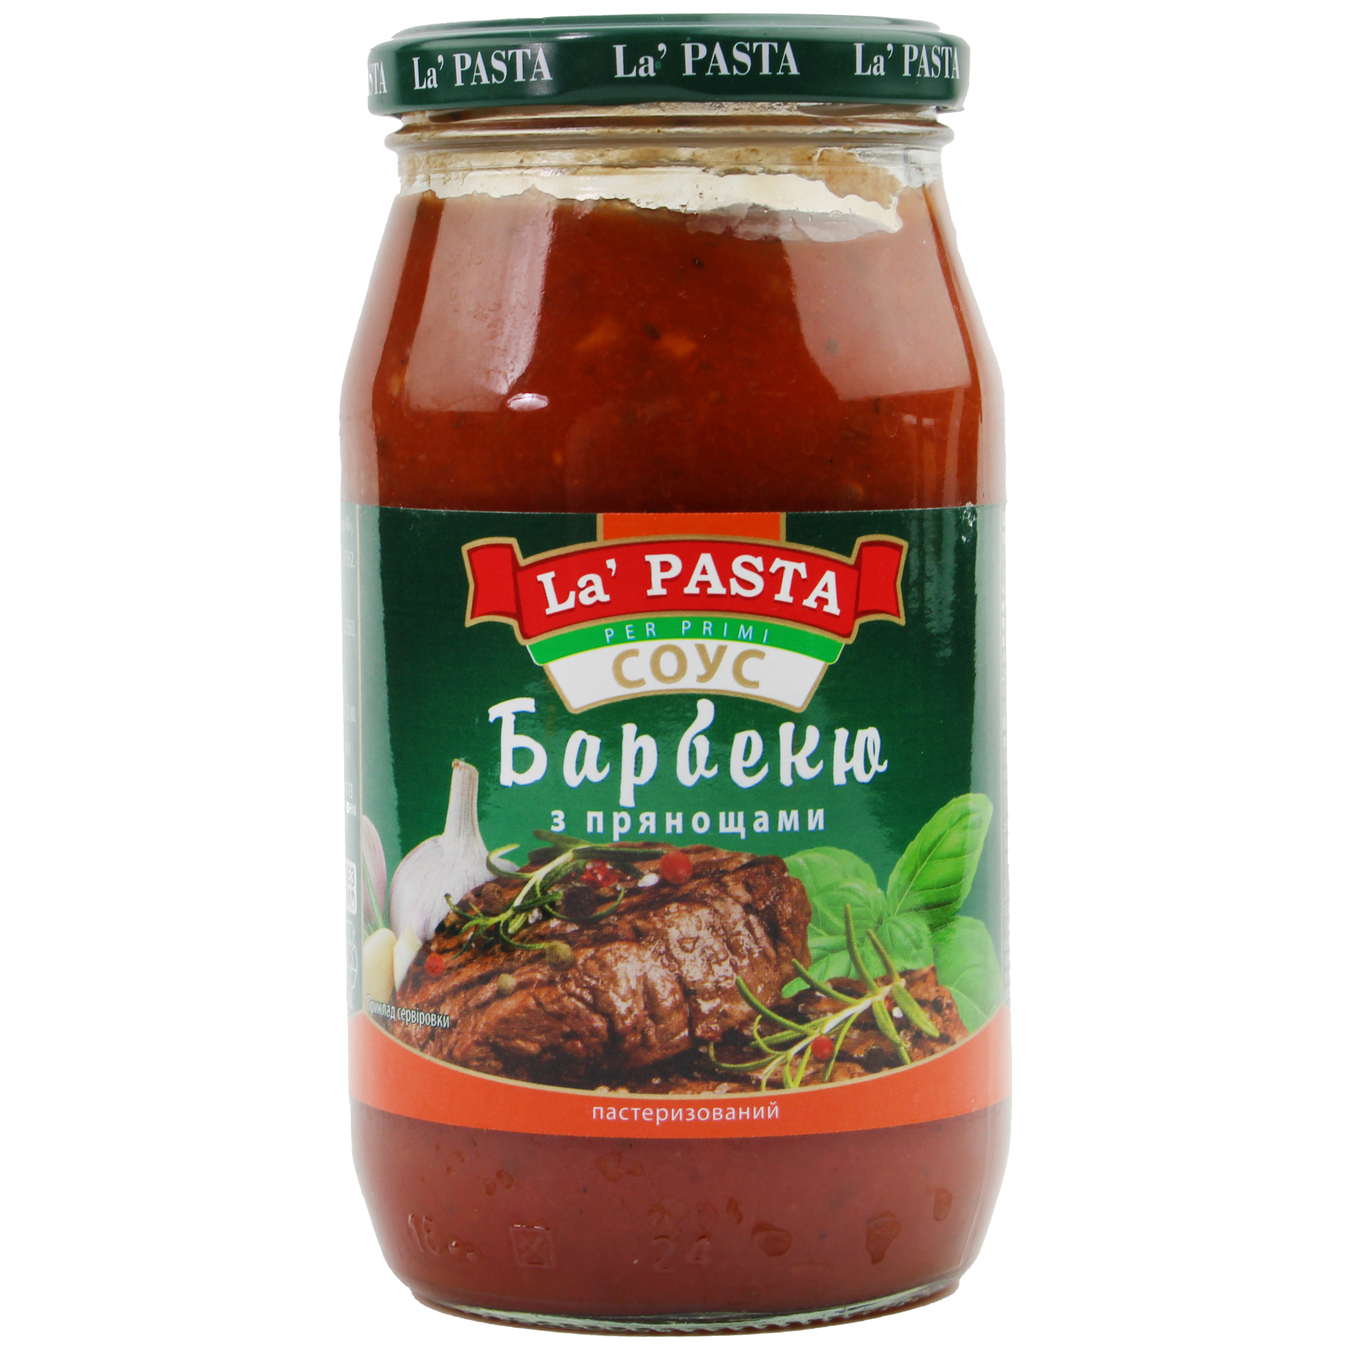 La Pasta Barbecue With Spices For Meat Sauce 460g